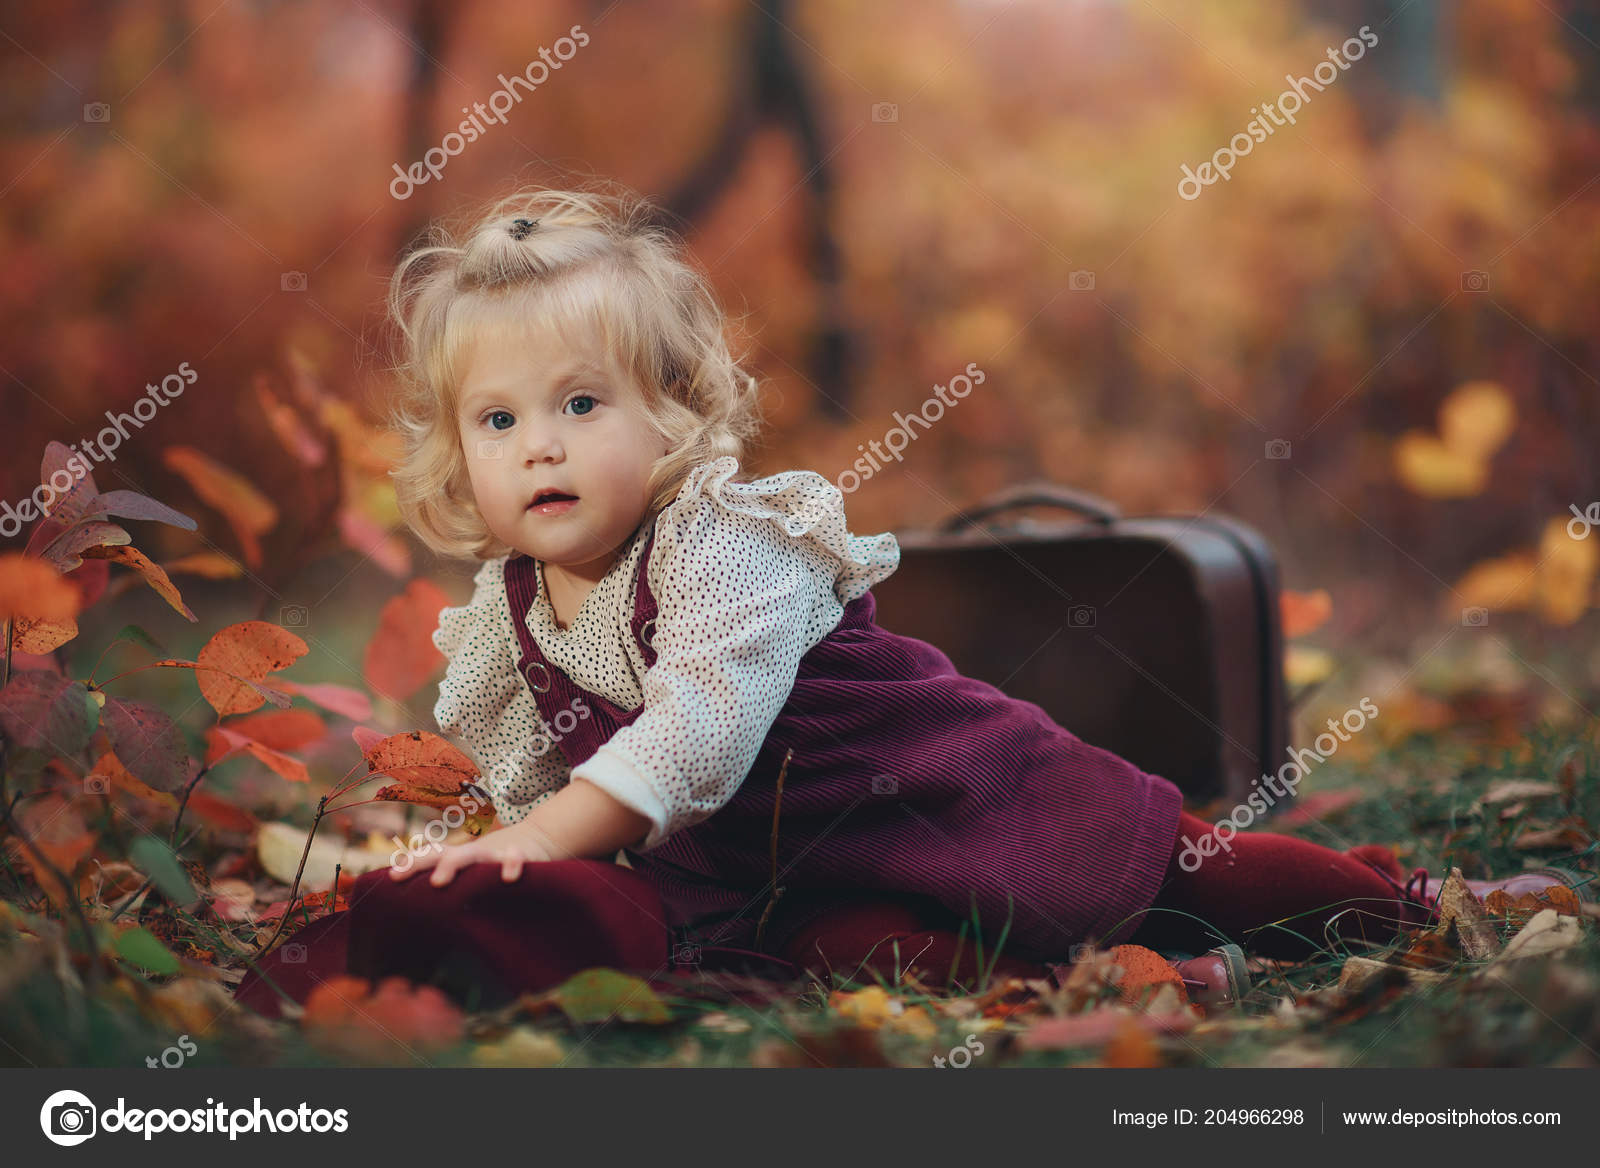 Portrait Of A Cute Little Blonde Girl With Wavy Hair In An